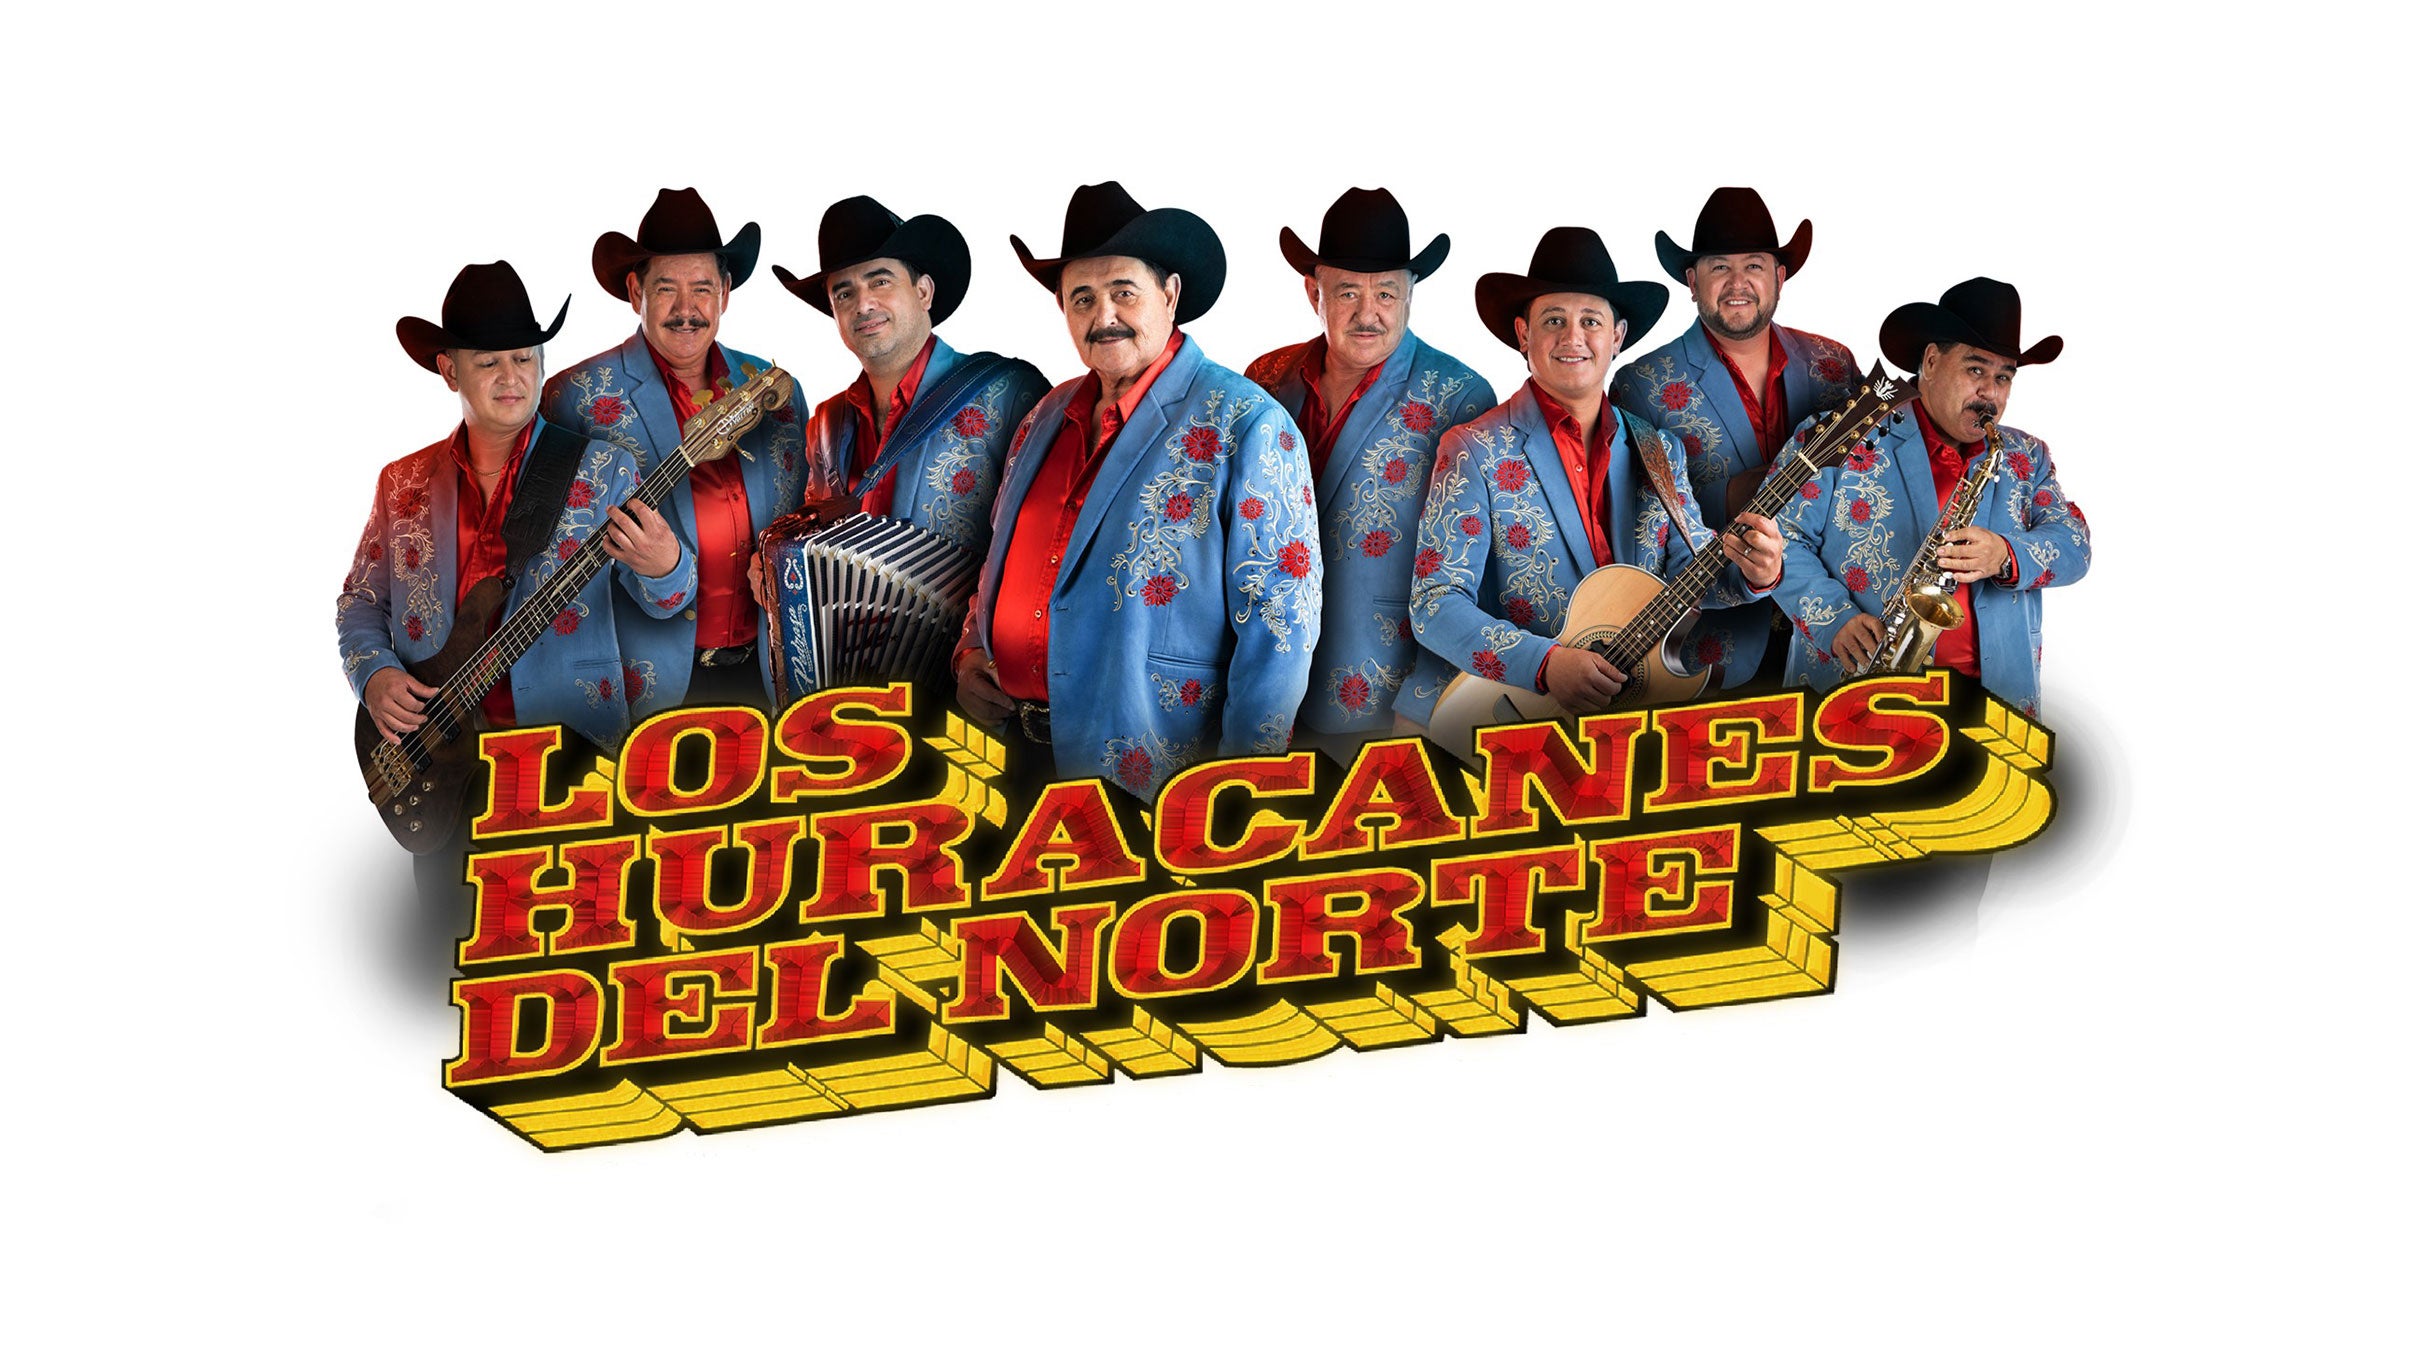 Los Huracanes del Norte free presale listing for show tickets in Primm, NV (Star Of The Desert Arena at Primm Valley Resorts)